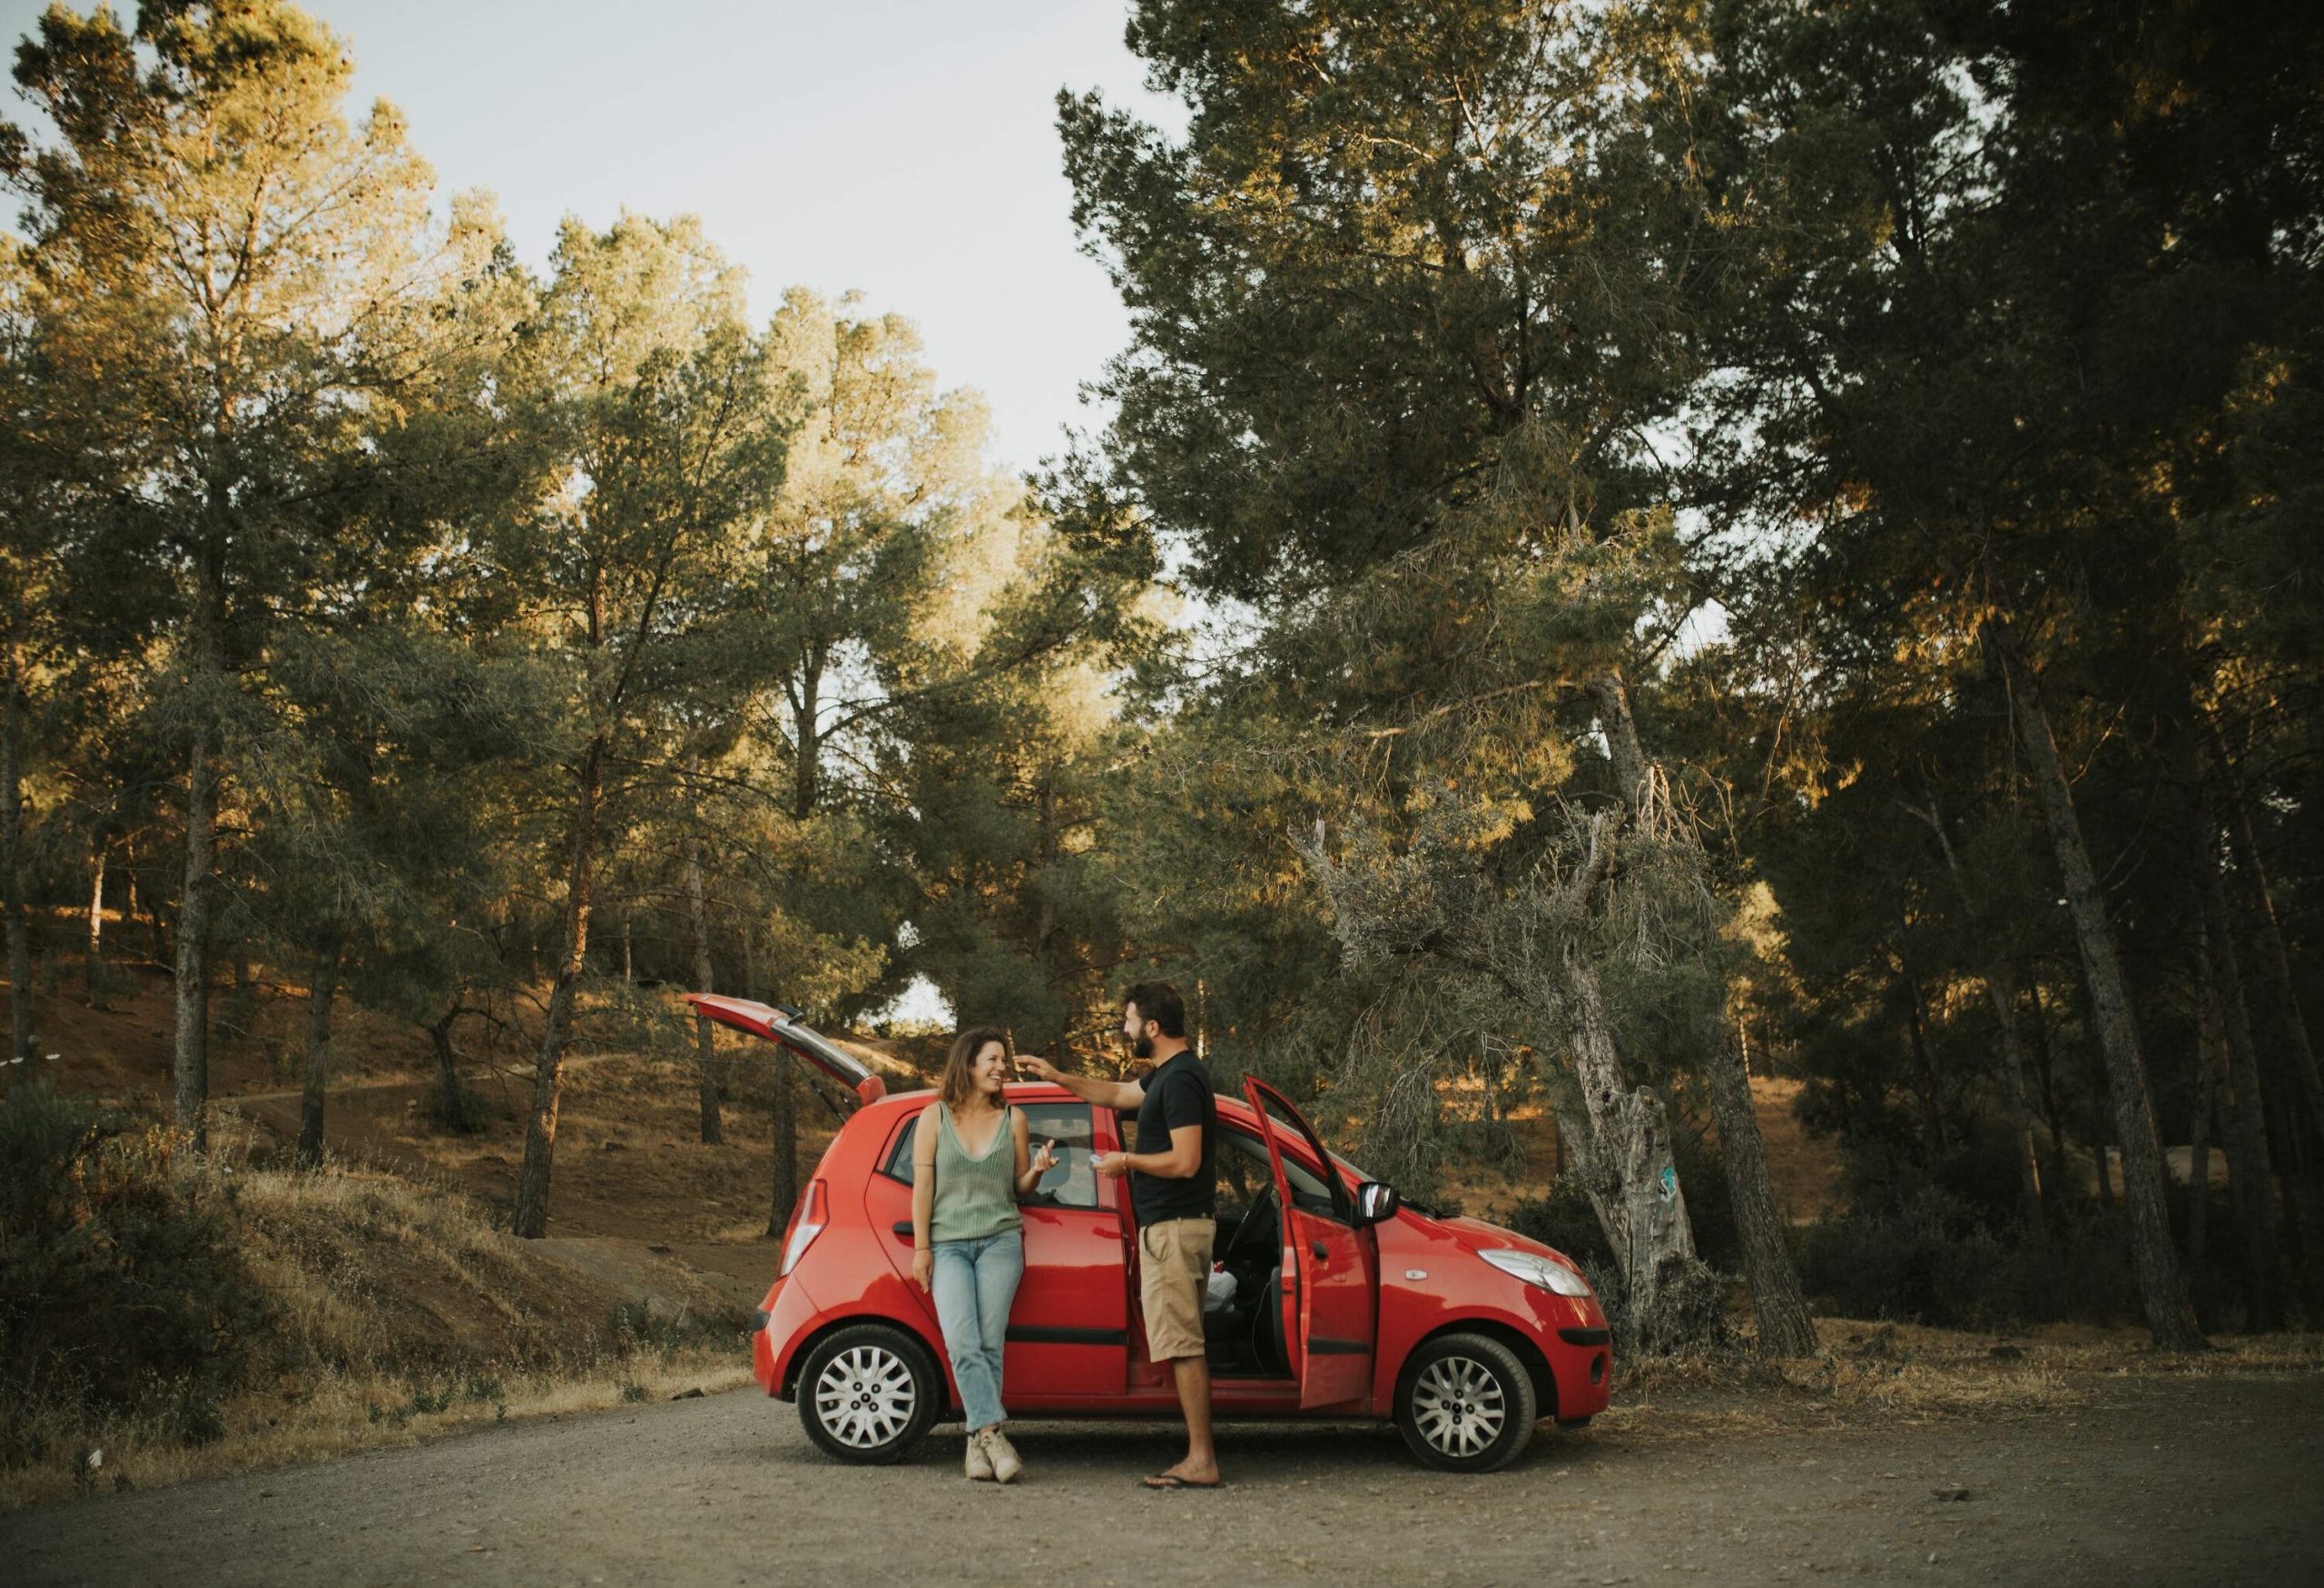 Two people standing on the side of a parked red car with open doors with a view of tall trees in the back.